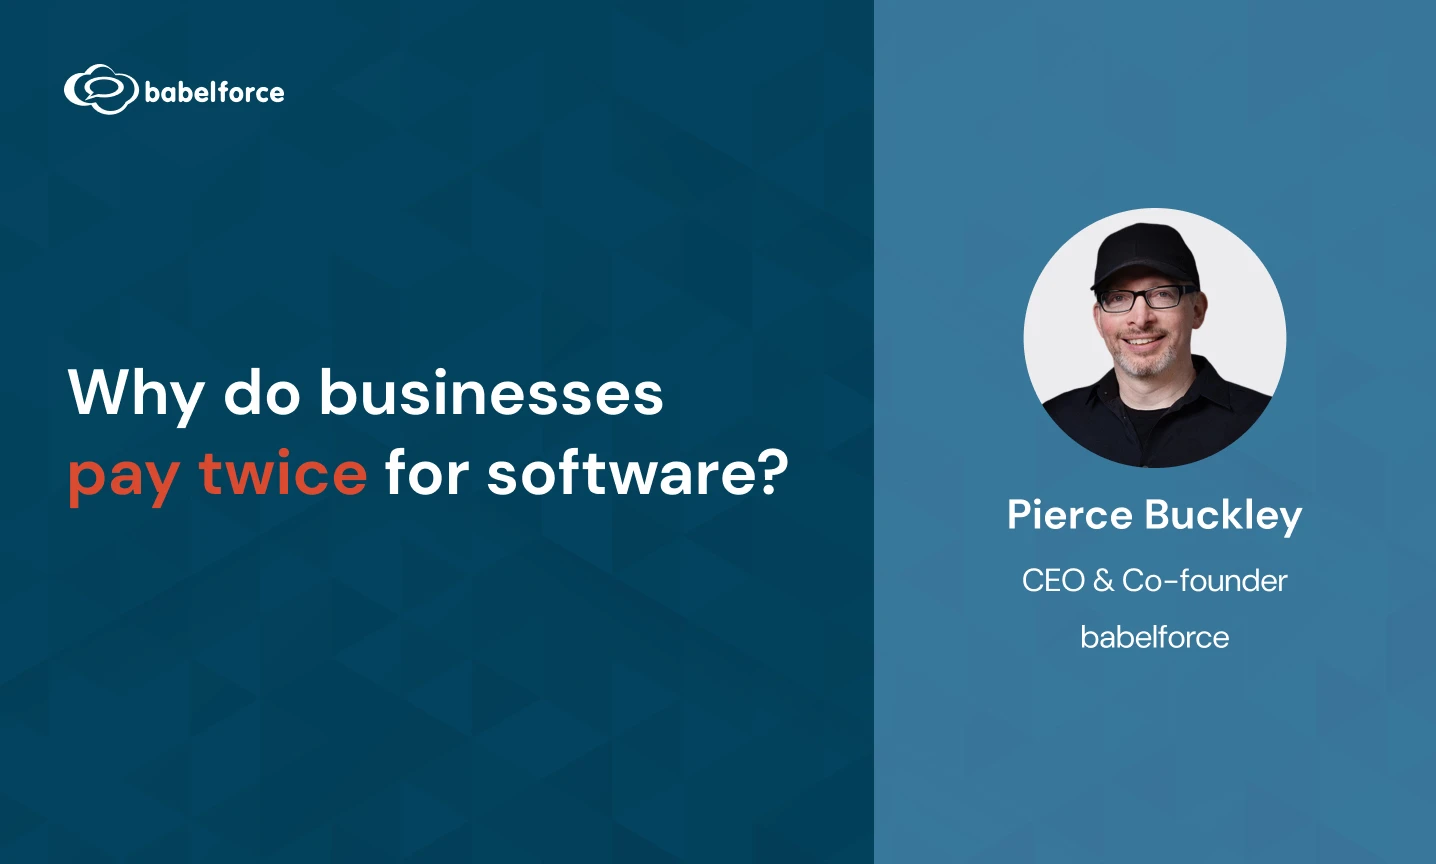 Why do businesses pay twice for software?